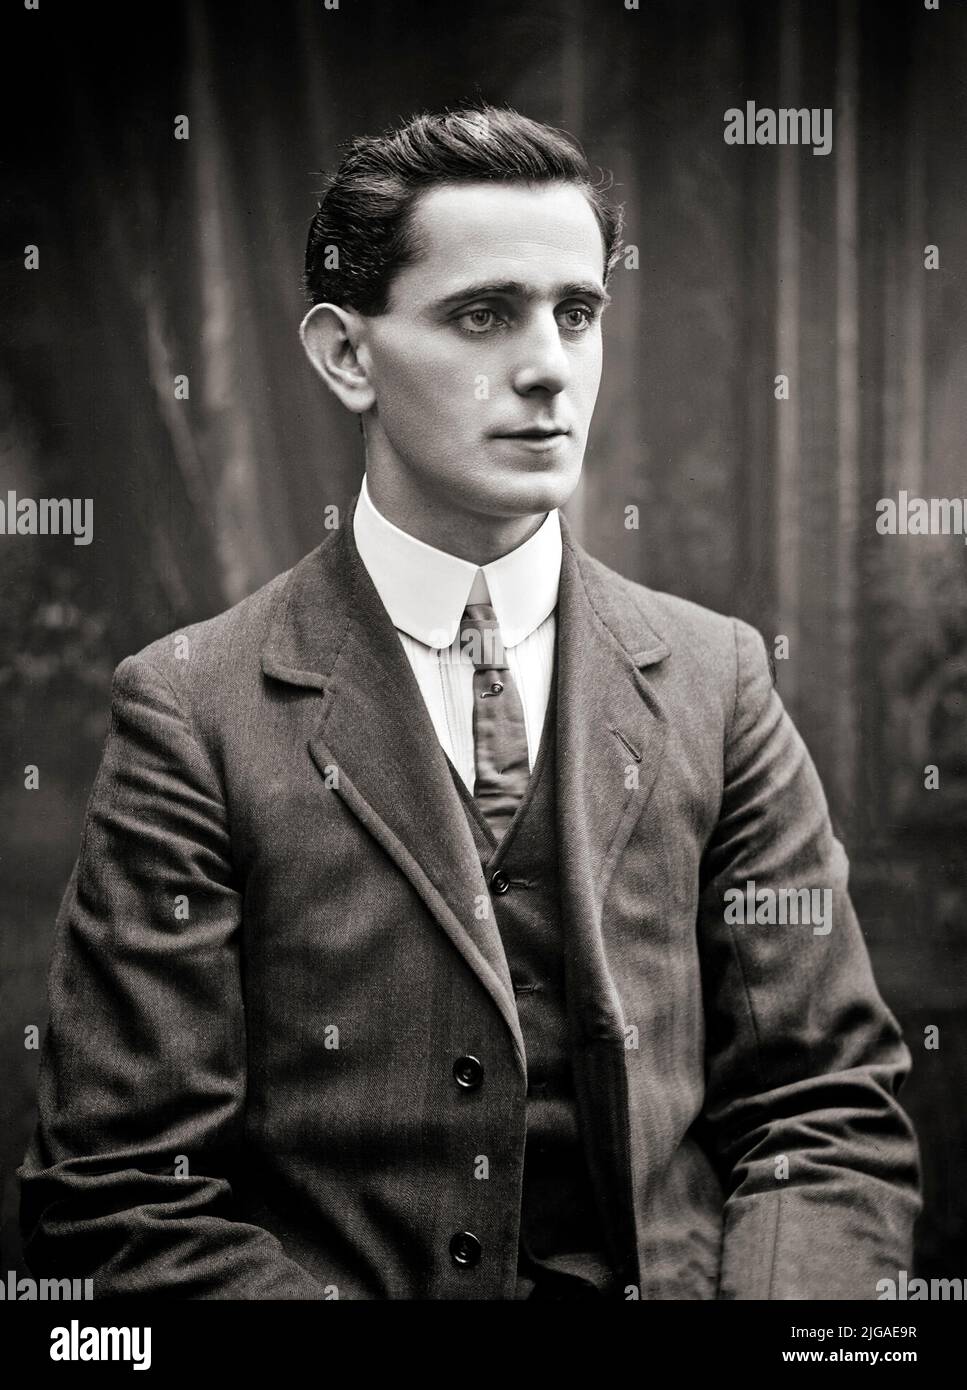 Seán Mac Diarmada (1883-1916), also known as Seán MacDermott, was an Irish republican political activist and revolutionary leader. He was one of the seven leaders of the Easter Rising of 1916, which he helped to organise as a member of the Military Committee of the Irish Republican Brotherhood (IRB) and was a signatory of the Proclamation of the Irish Republic. He was executed for his part in the Rising at age 33. Stock Photo